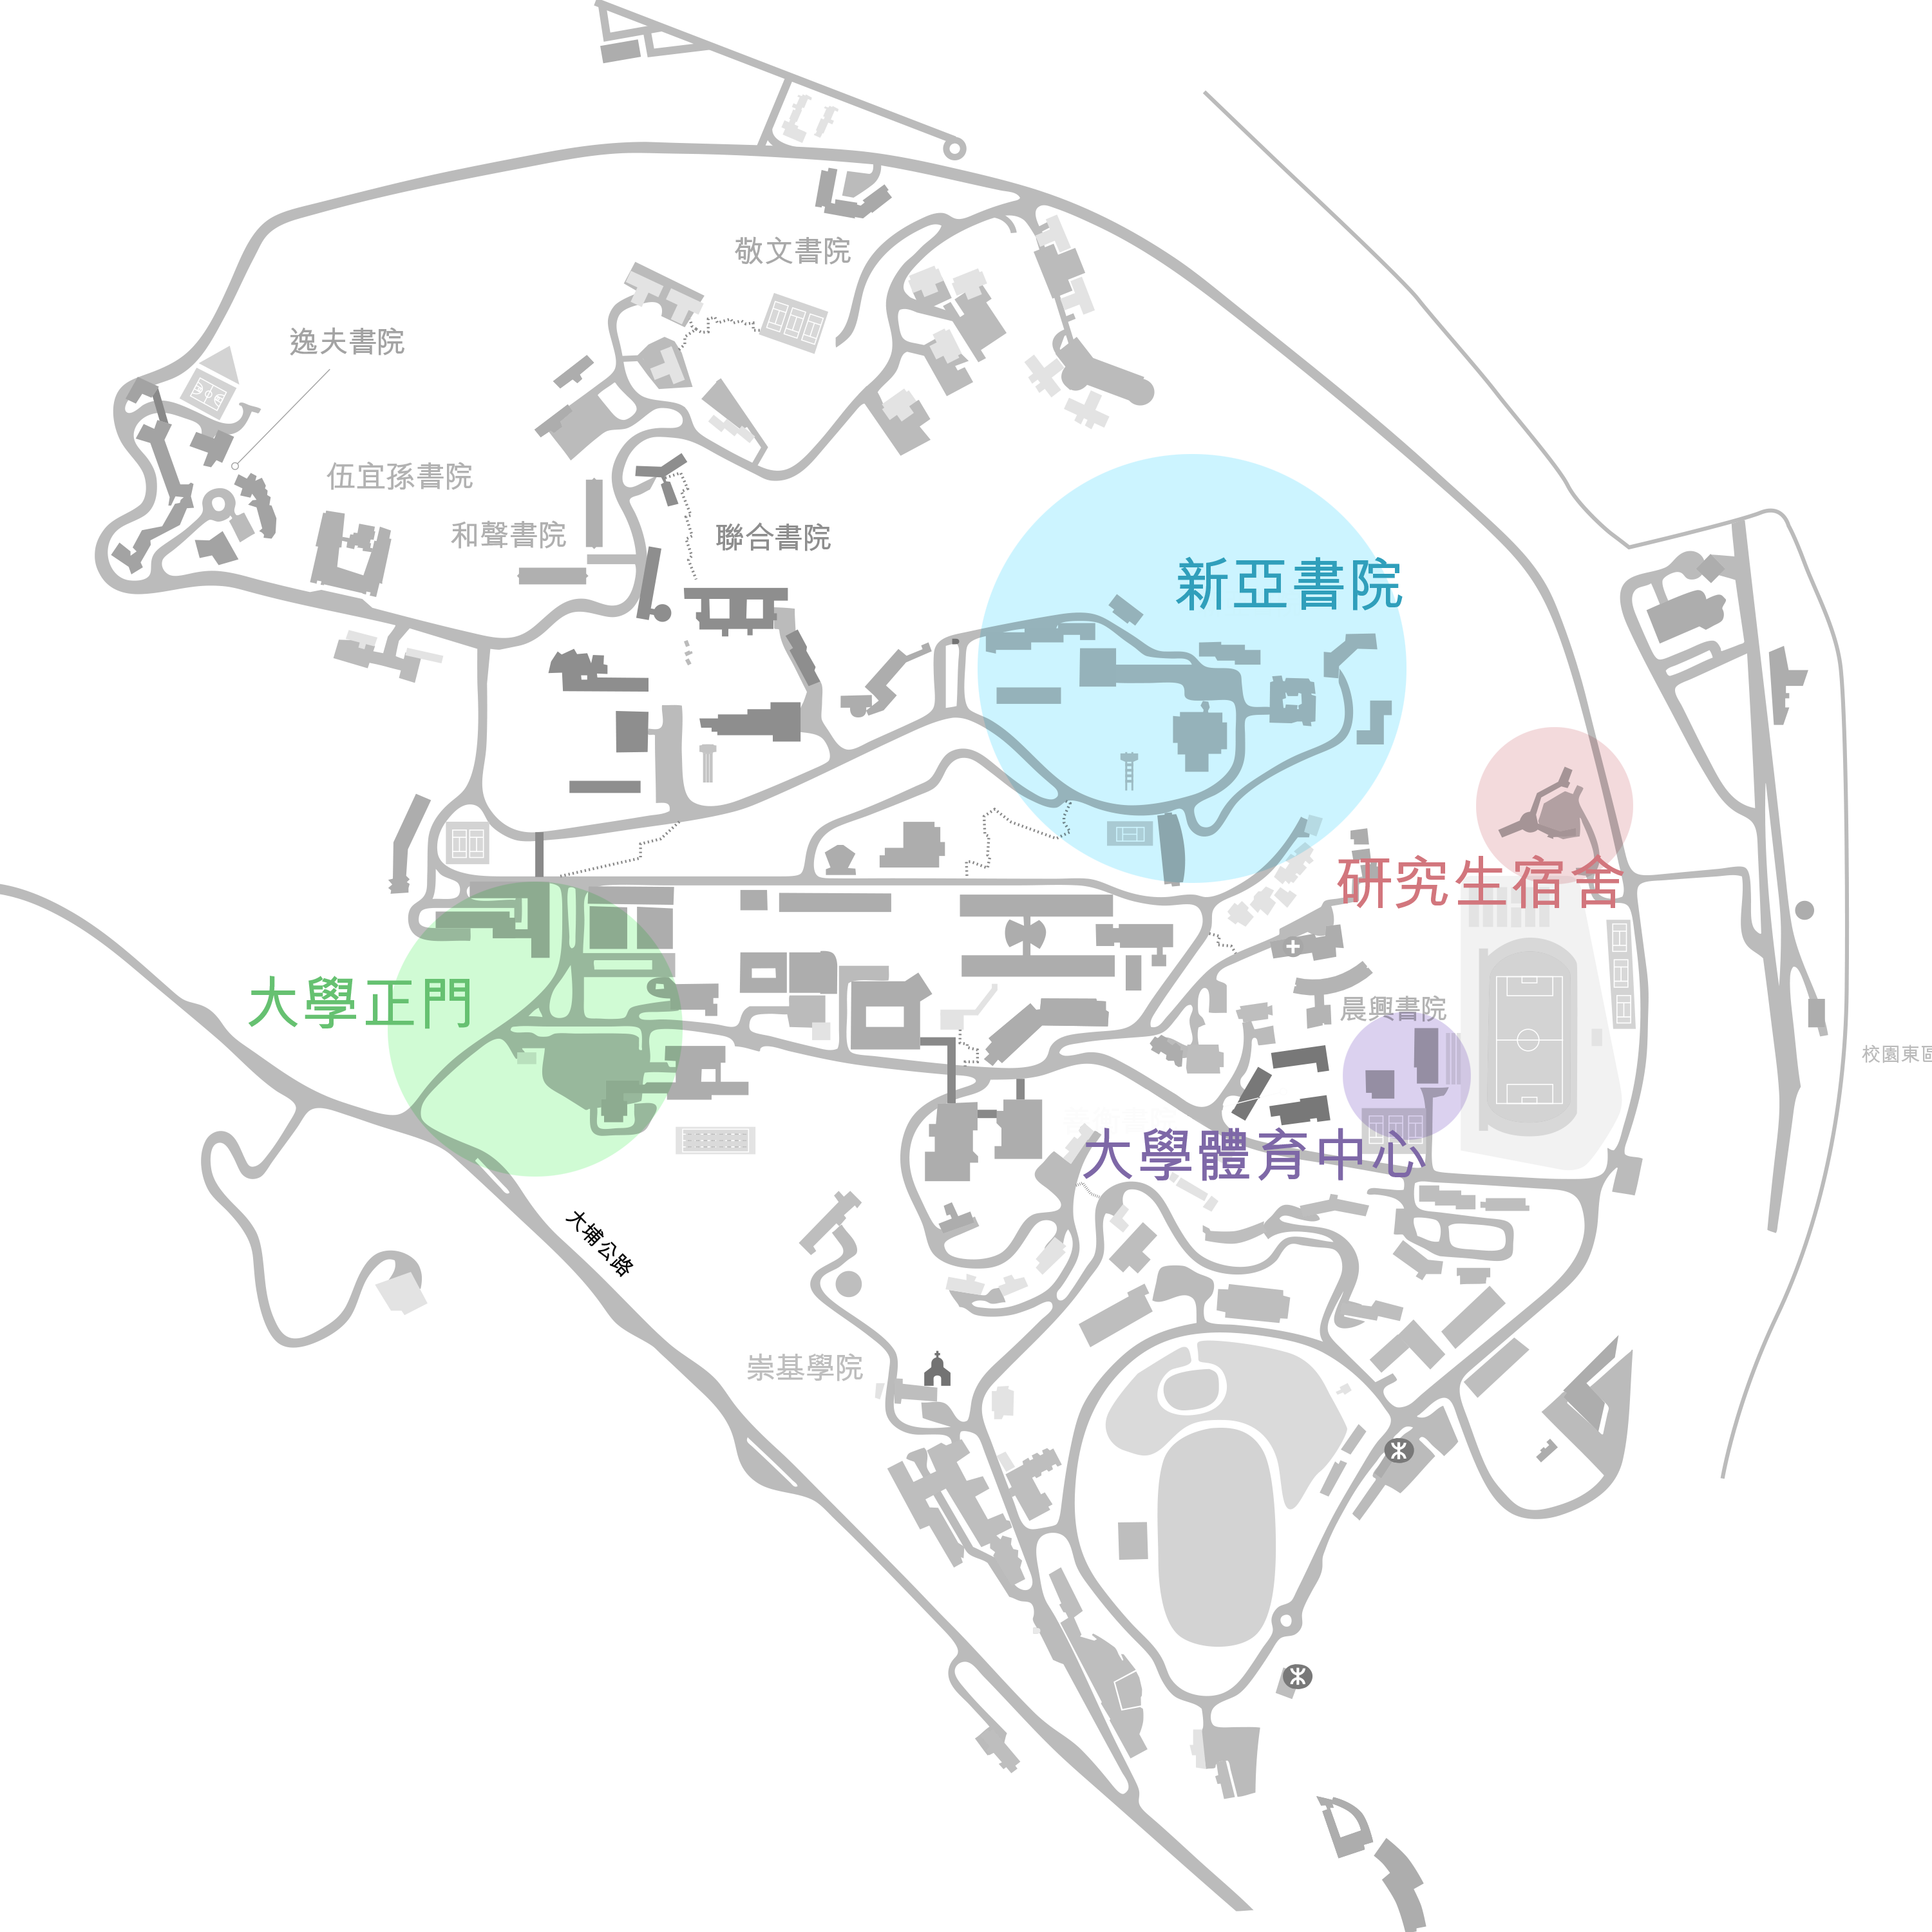 Campus map and sampling locations